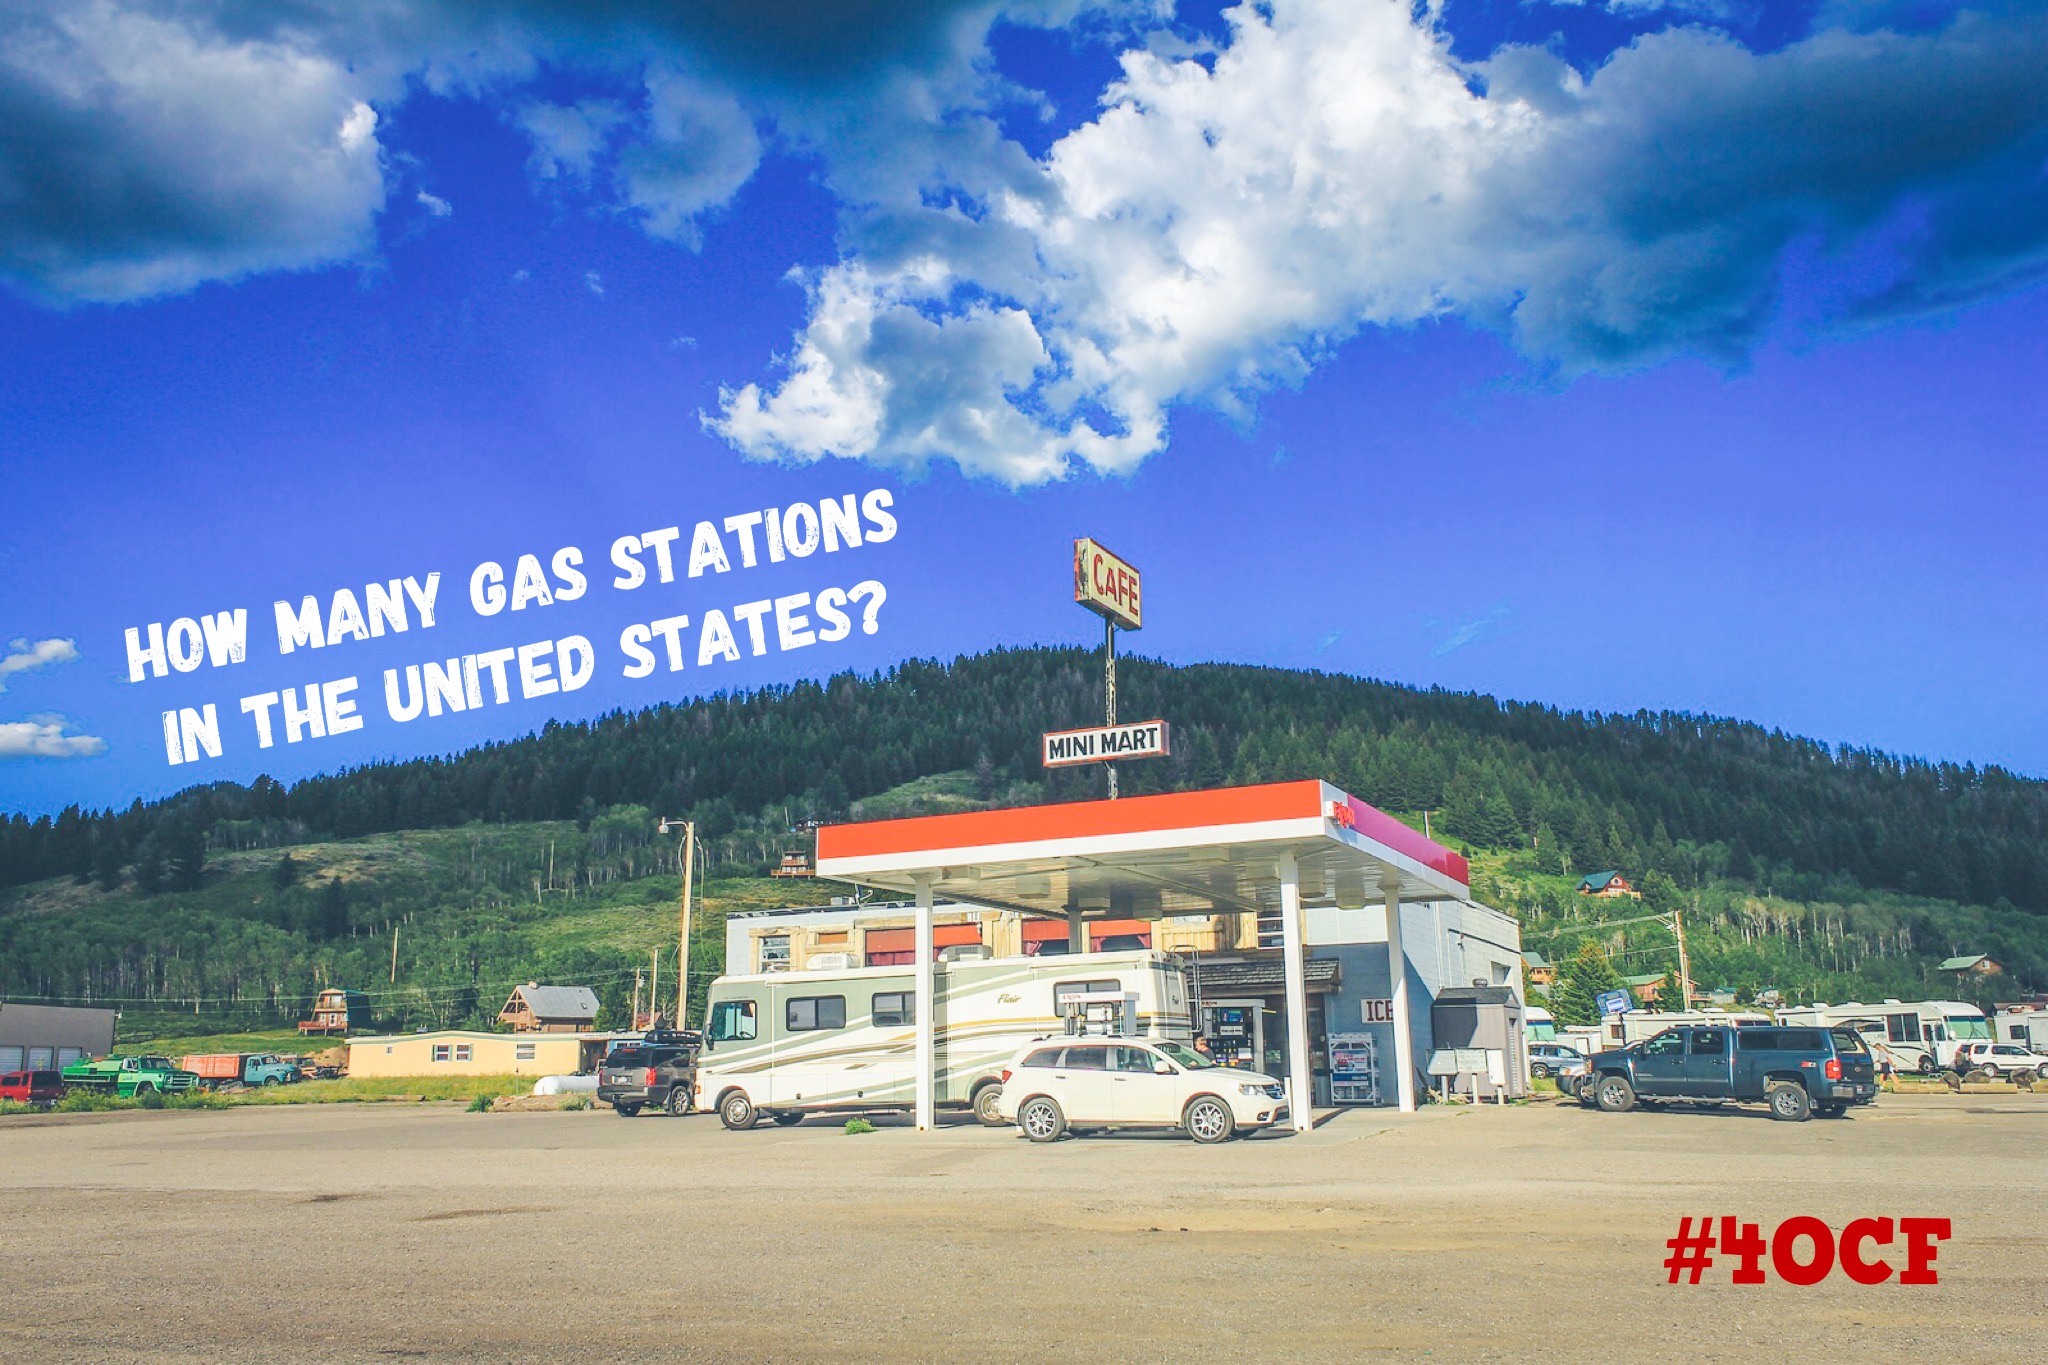 How Many Gas Stations are in the U.S.? 4 O'Clock Faculty